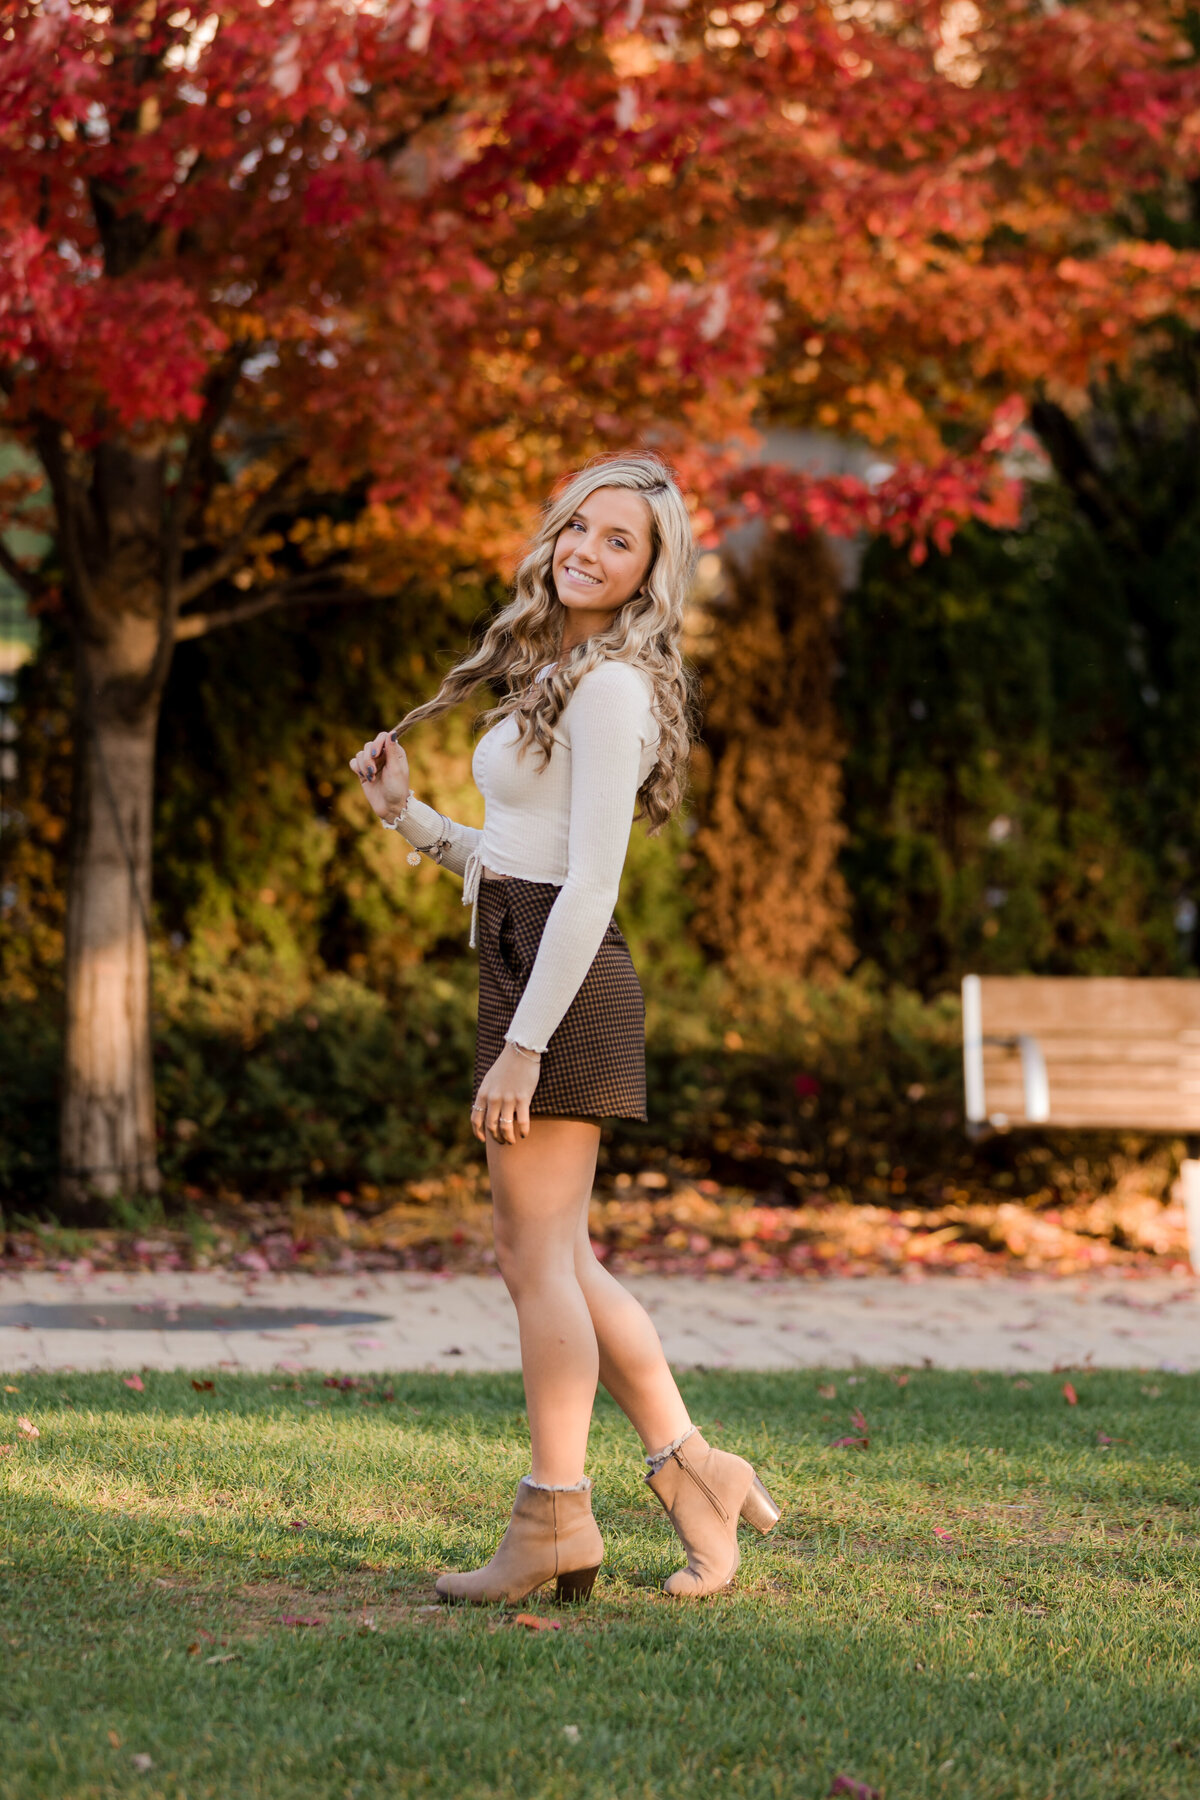 A blonde girl twirls her hair in front of red and orange colored trees for her senior photos.